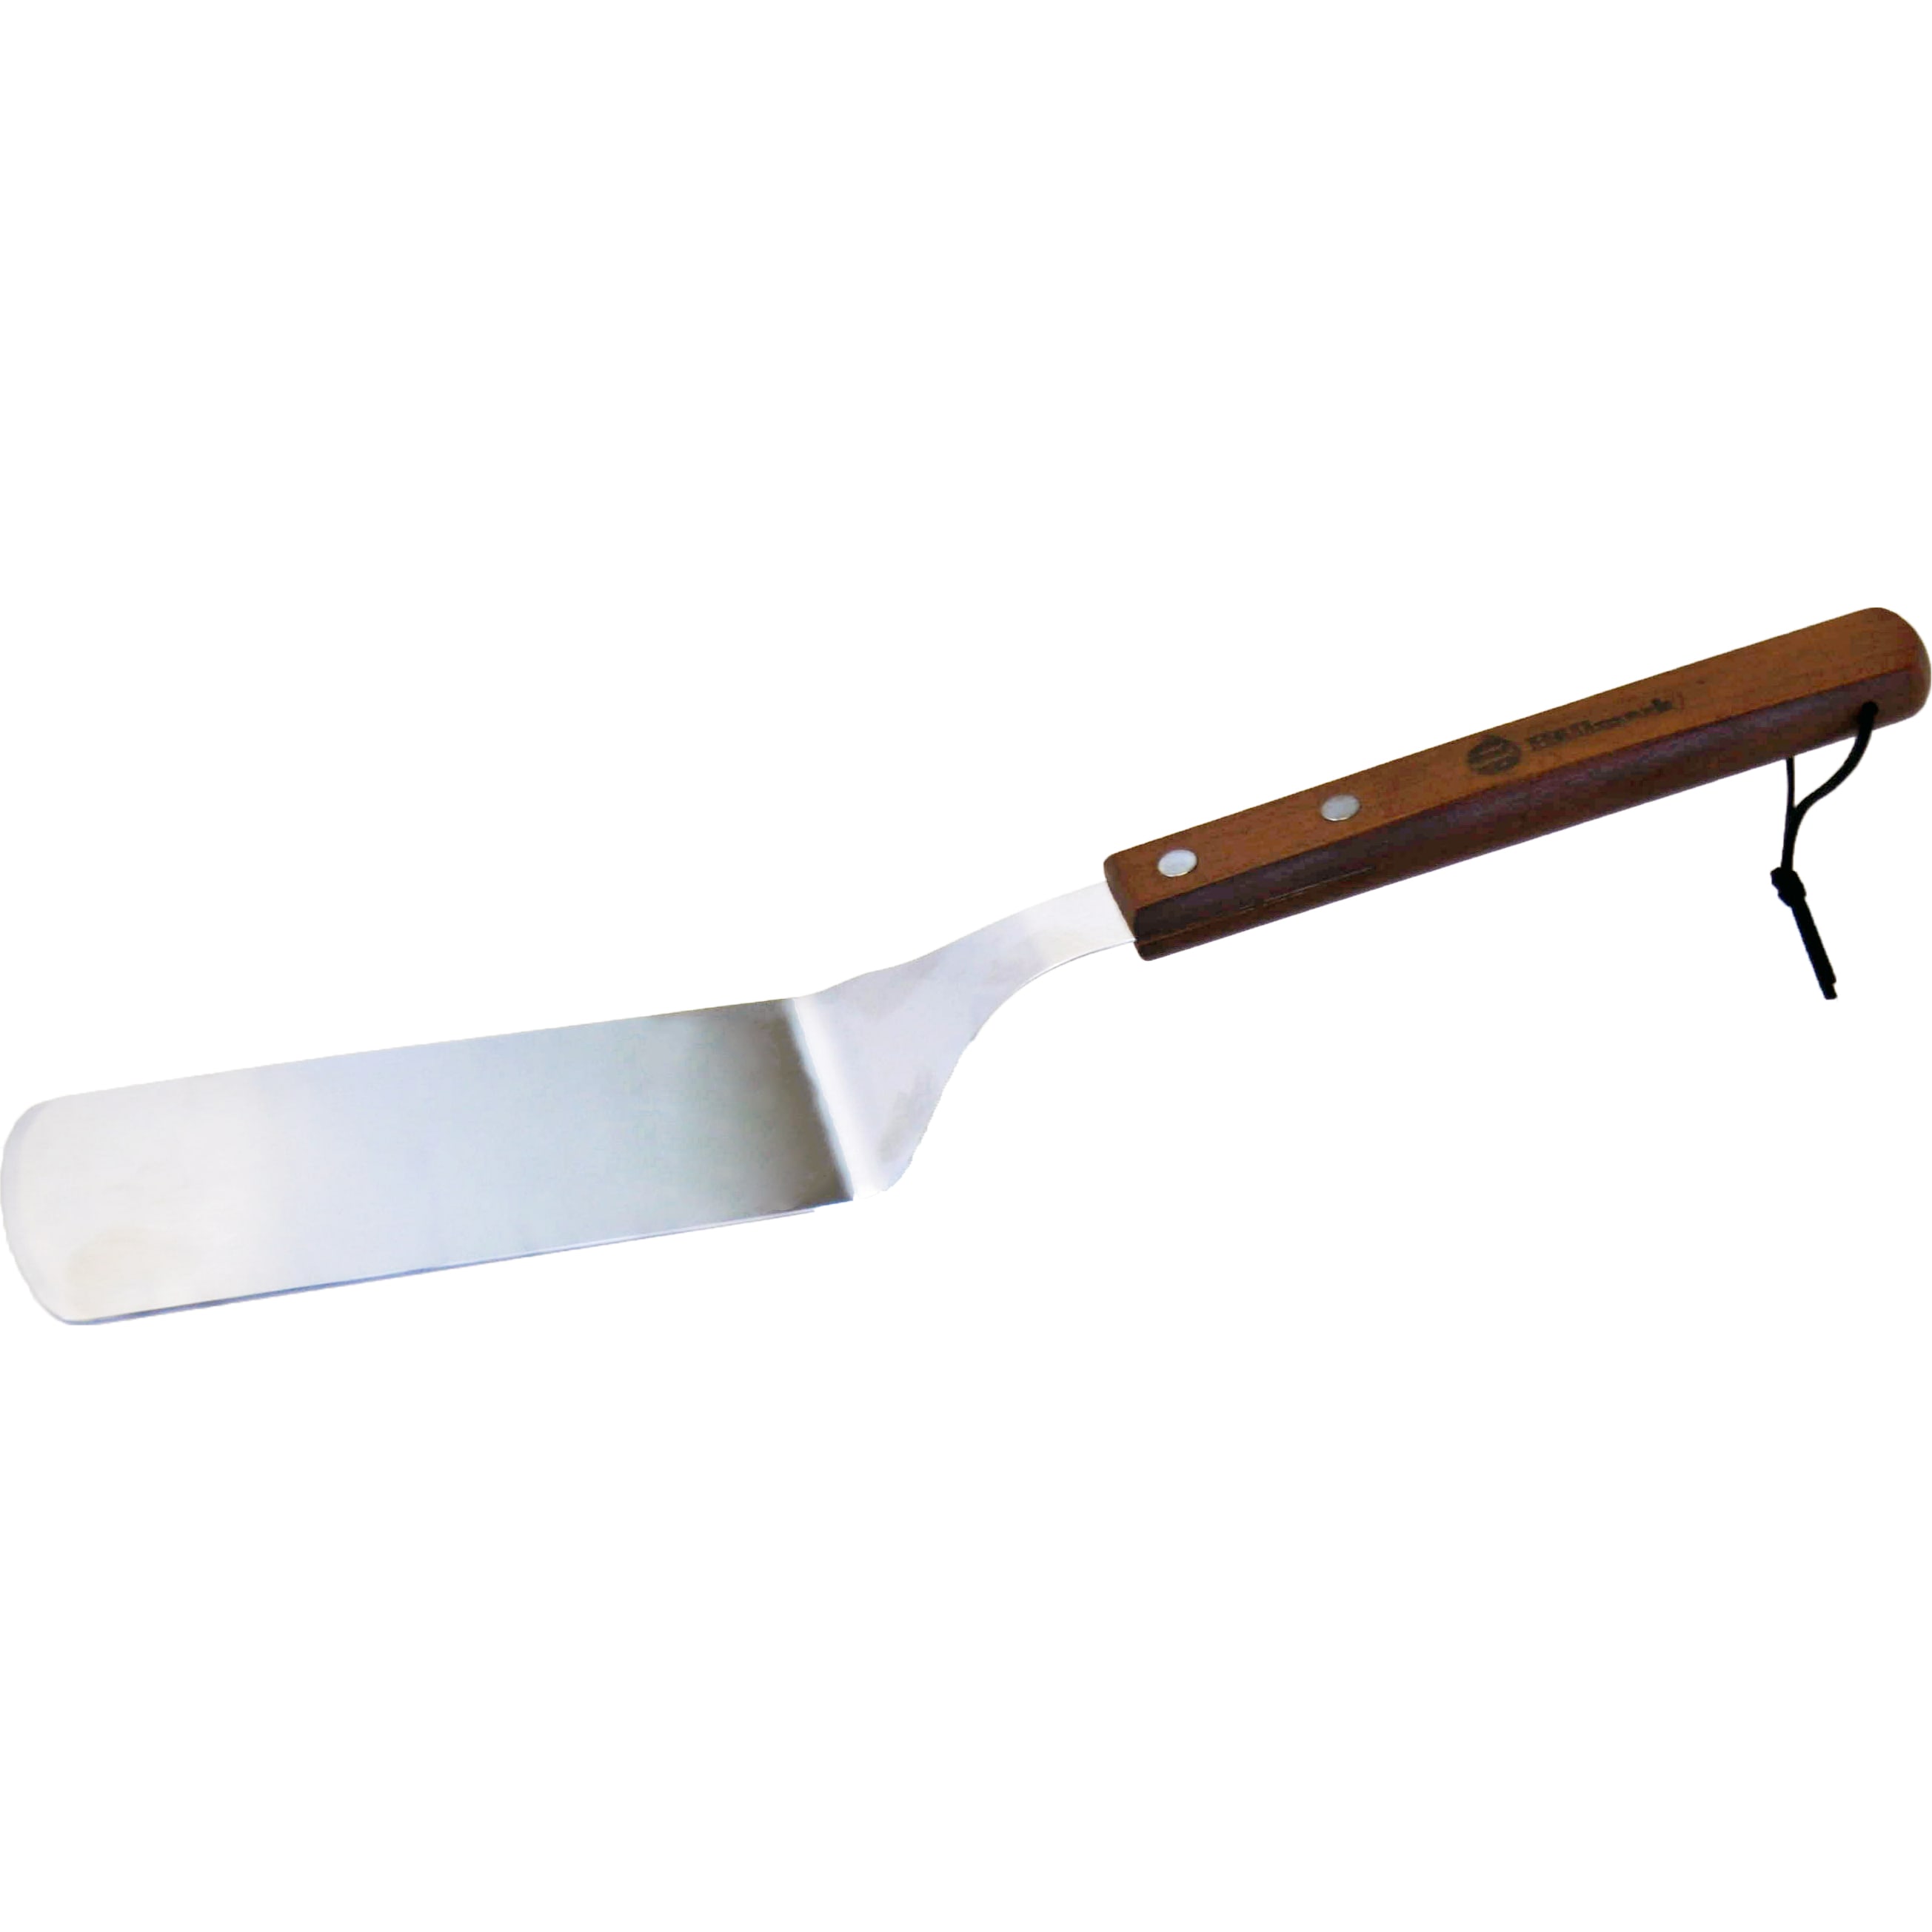 BBQ Spatula 46 cm Stainless Steel/Wood